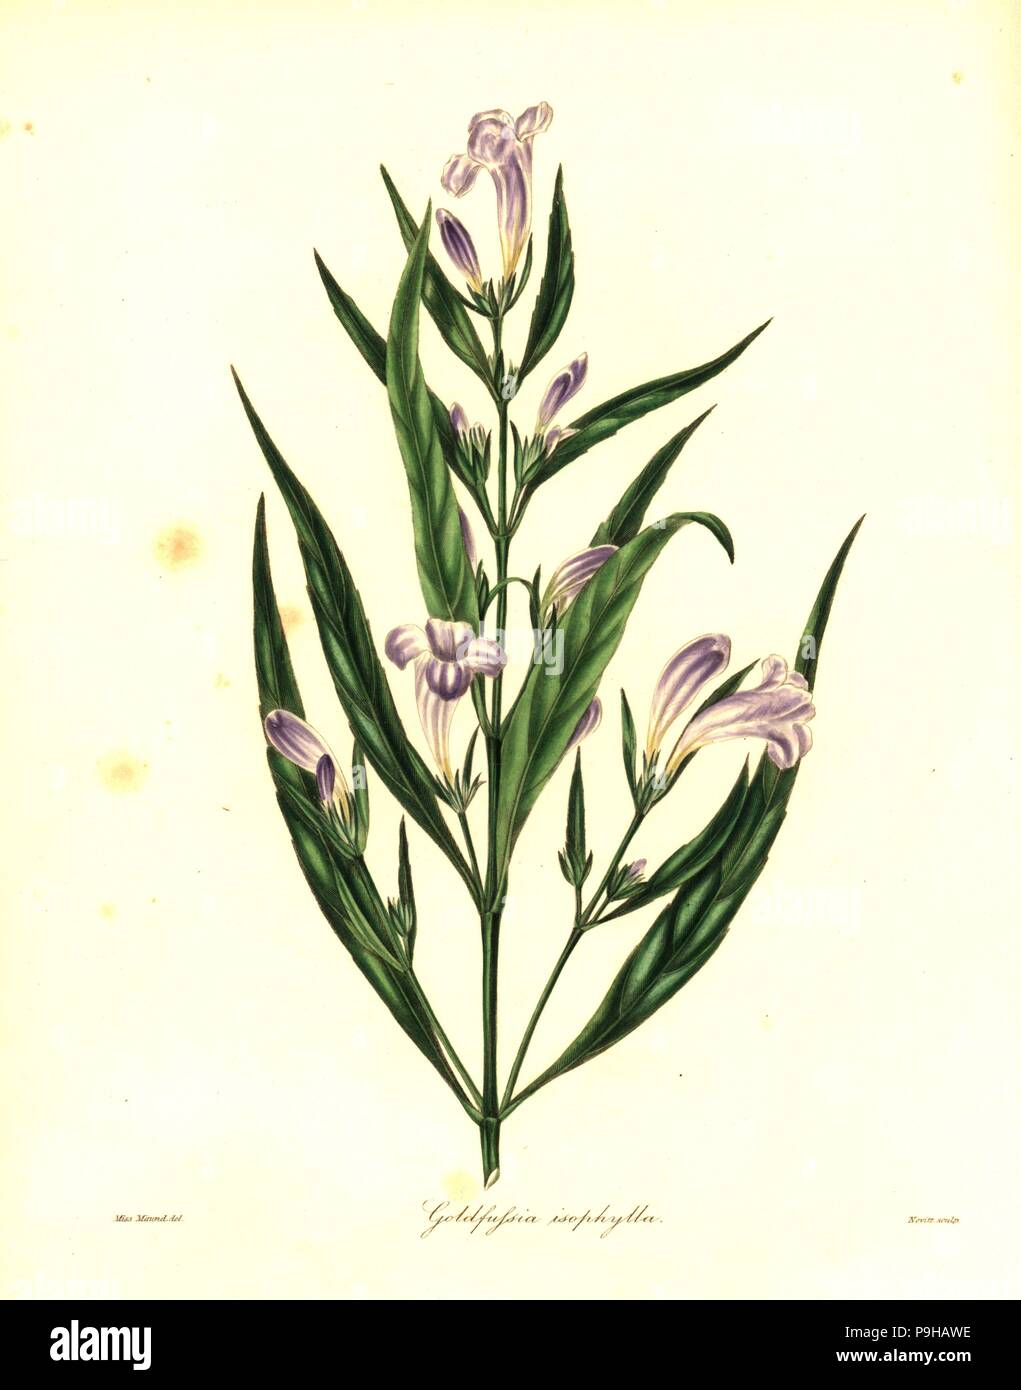 Strobilanthes persicifolia (Equal-leaved goldfussia, Goldfussia isophylla). Handcoloured copperplate engraving by S. Nevitt after a botanical illustration by Miss Maund from Benjamin Maund and the Rev. John Stevens Henslow's The Botanist, London, 1836. Stock Photo